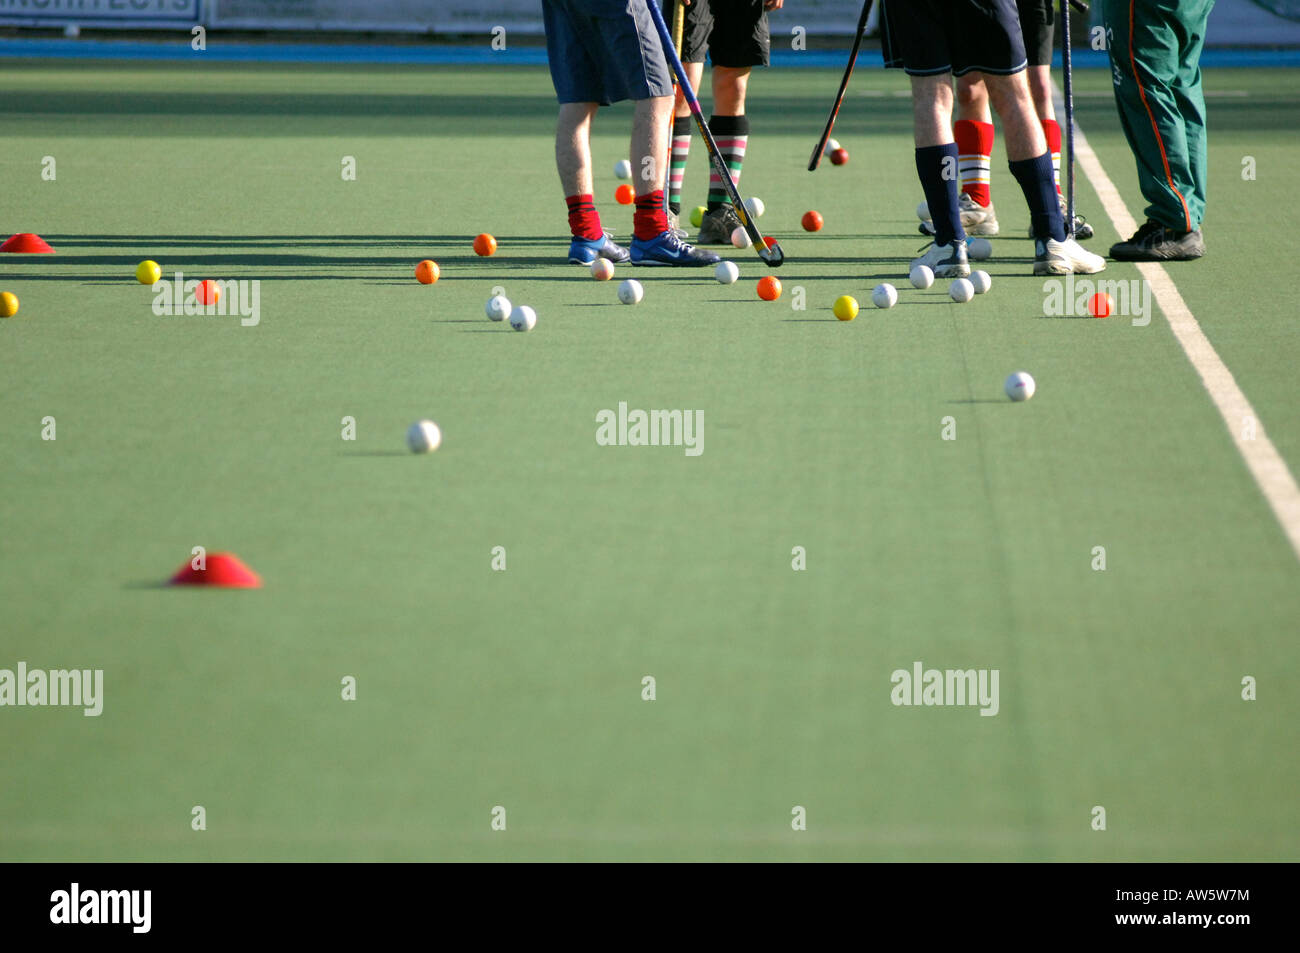 Photograph of college hockey players in training practice on hockey field and talking tactics with coach UK London. Stock Photo